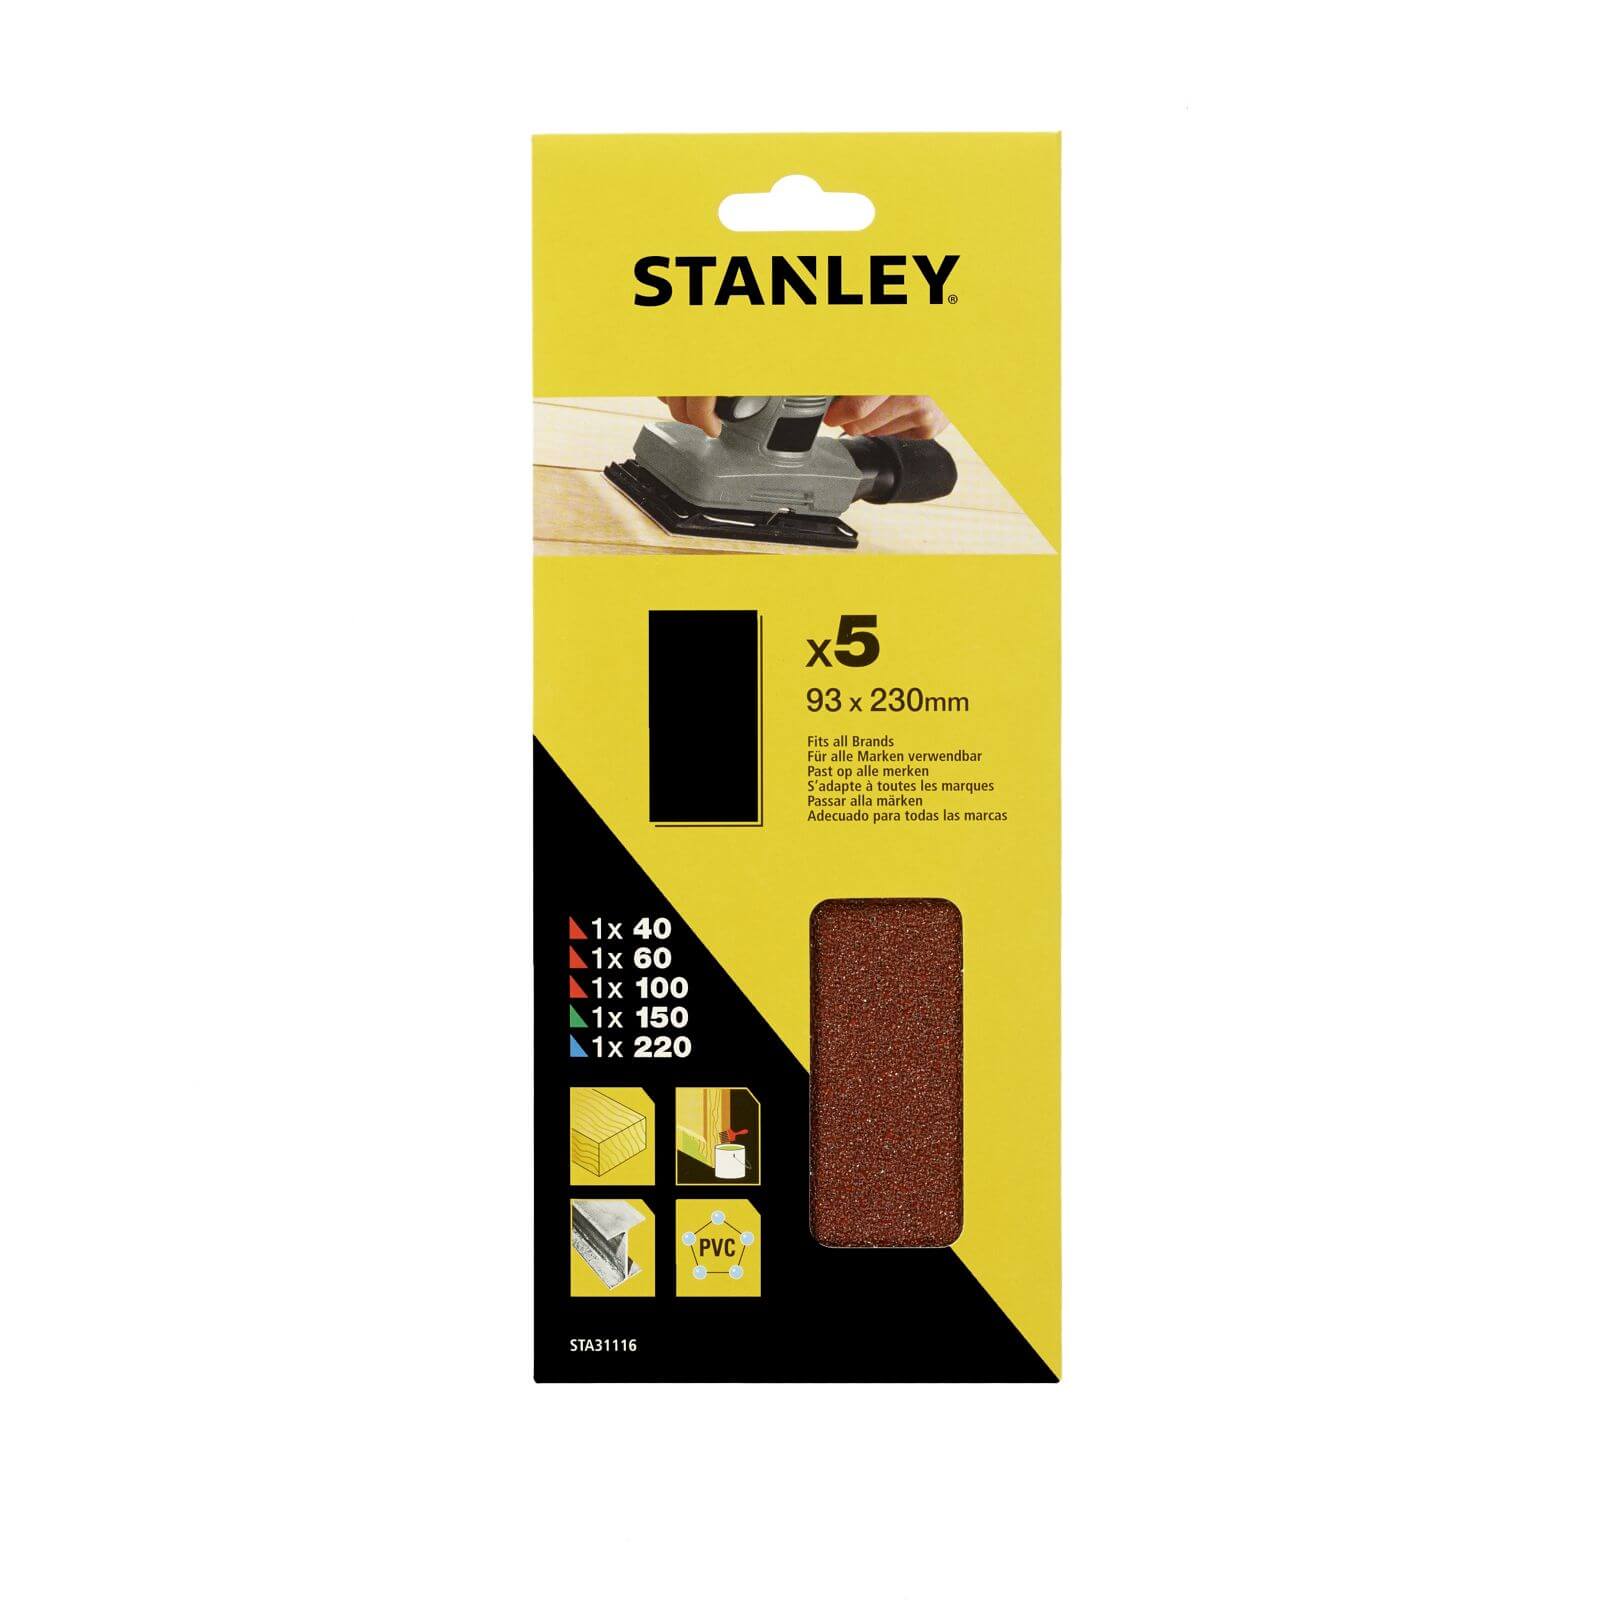 Stanley 1/3 Sheet Sander UNPunched Wire Clip Mixed Sanding Sheets - STA31116-XJ